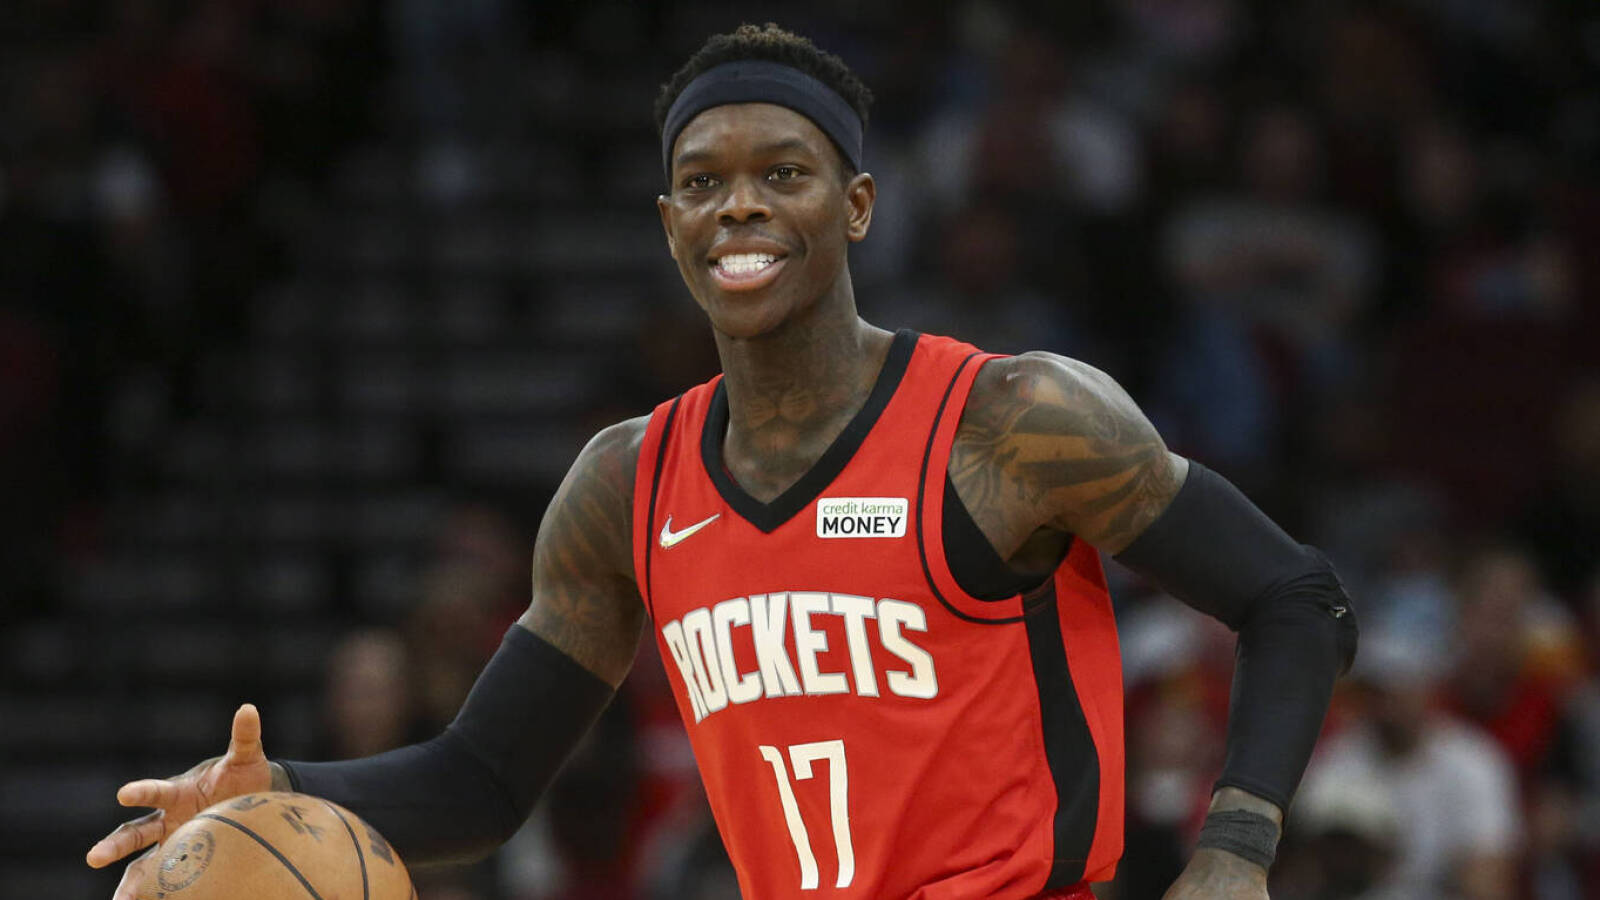 Dennis Schroder signs one-year deal with Lakers worth $2.64 million